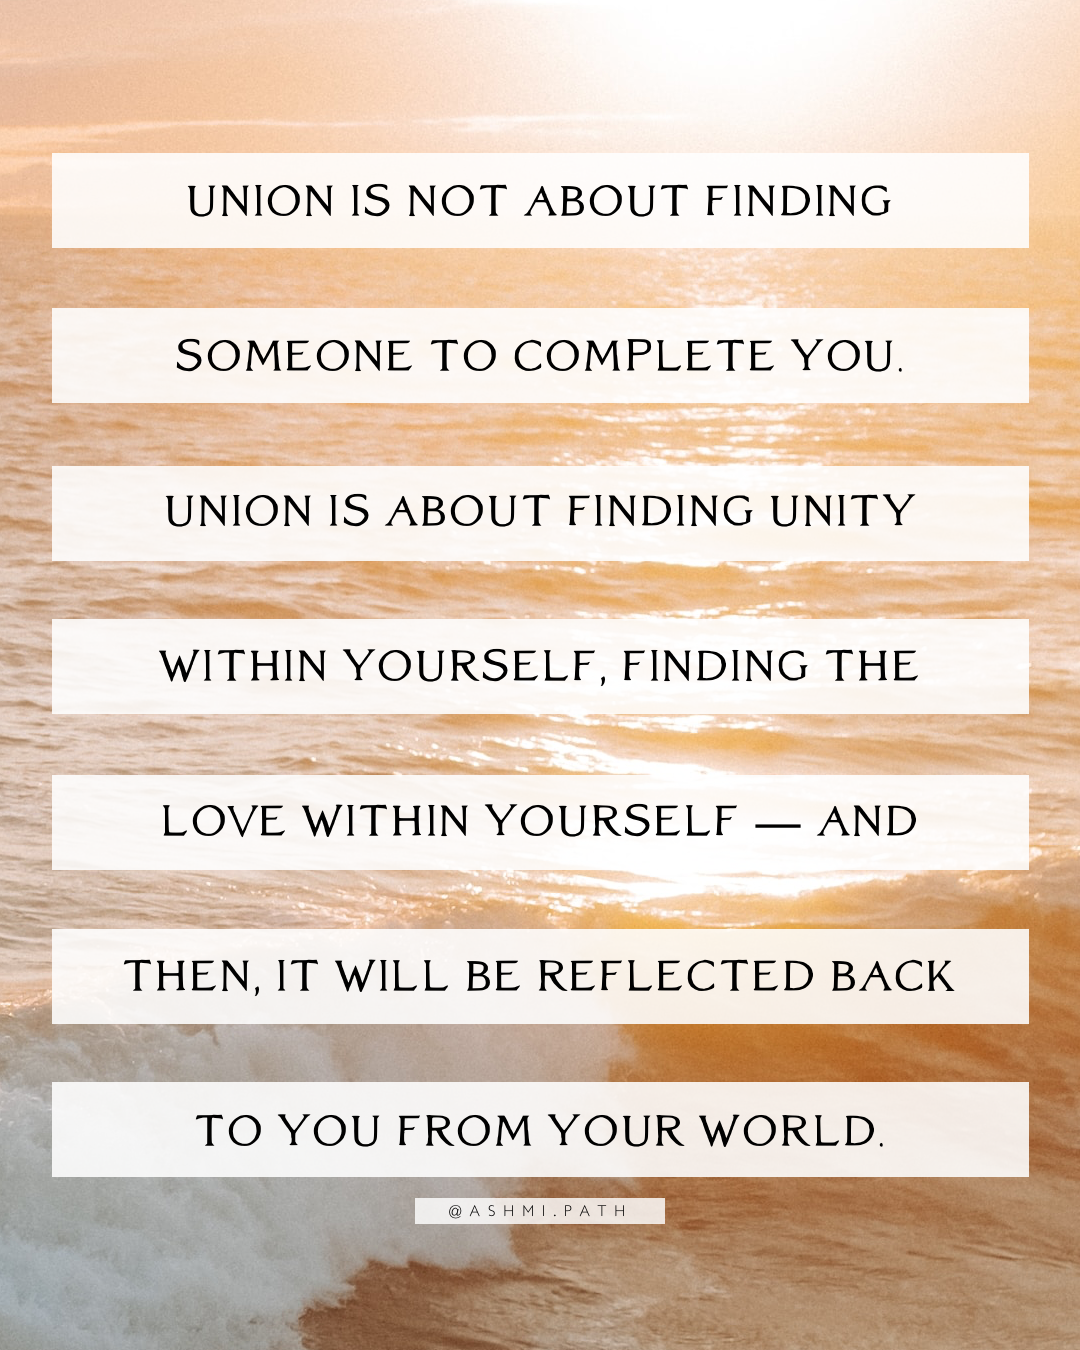 Finding Union Within Yourself + Next Ceremony on Ascension in 2 Days